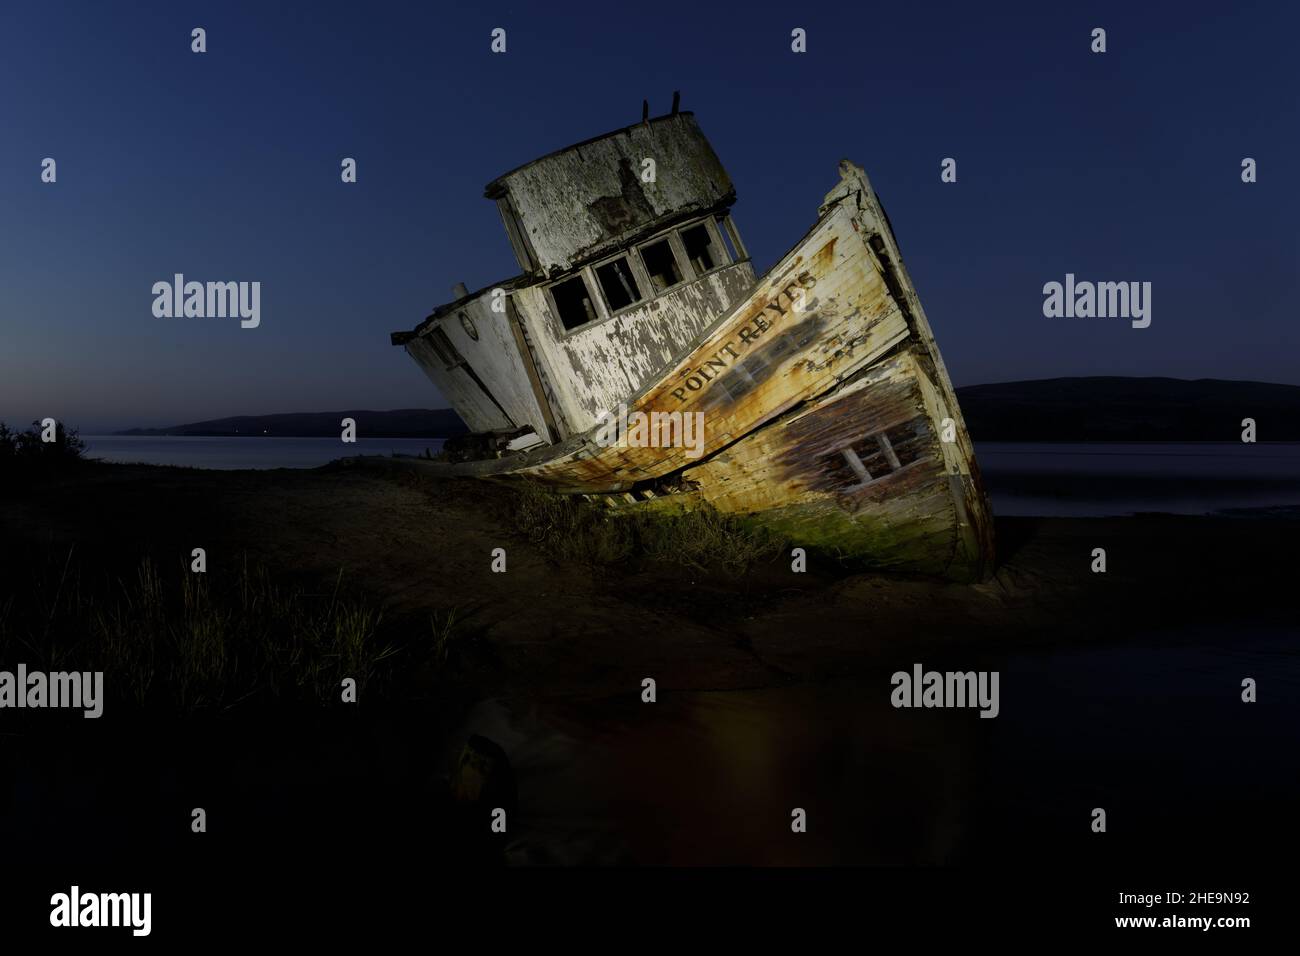 The S.S. Point Reyes shipwreck illuminated in the blue hour. Inverness, Point Reyes National Seashore, California, USA. Stock Photo